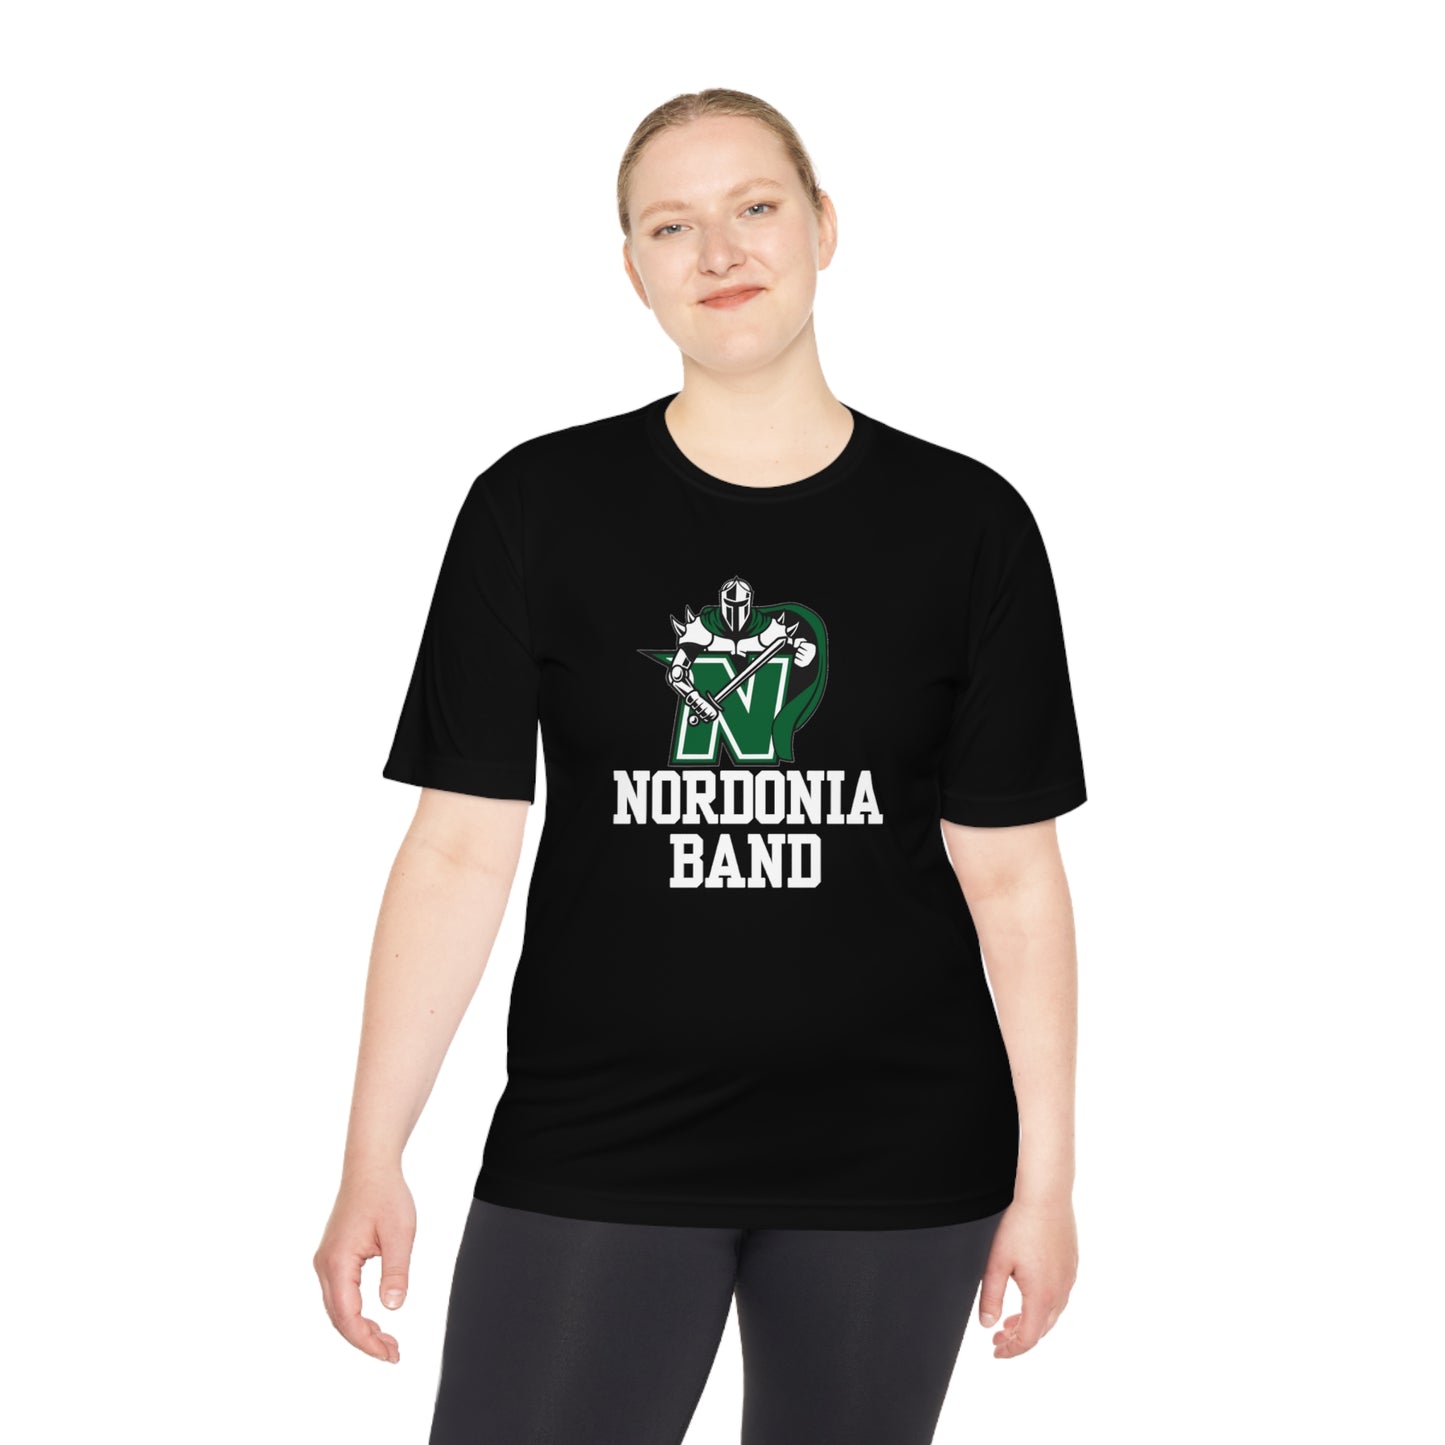 Adult Unisex Competitor Performance Band Logo Short Sleeve Graphic Tee - Nordonia Knights